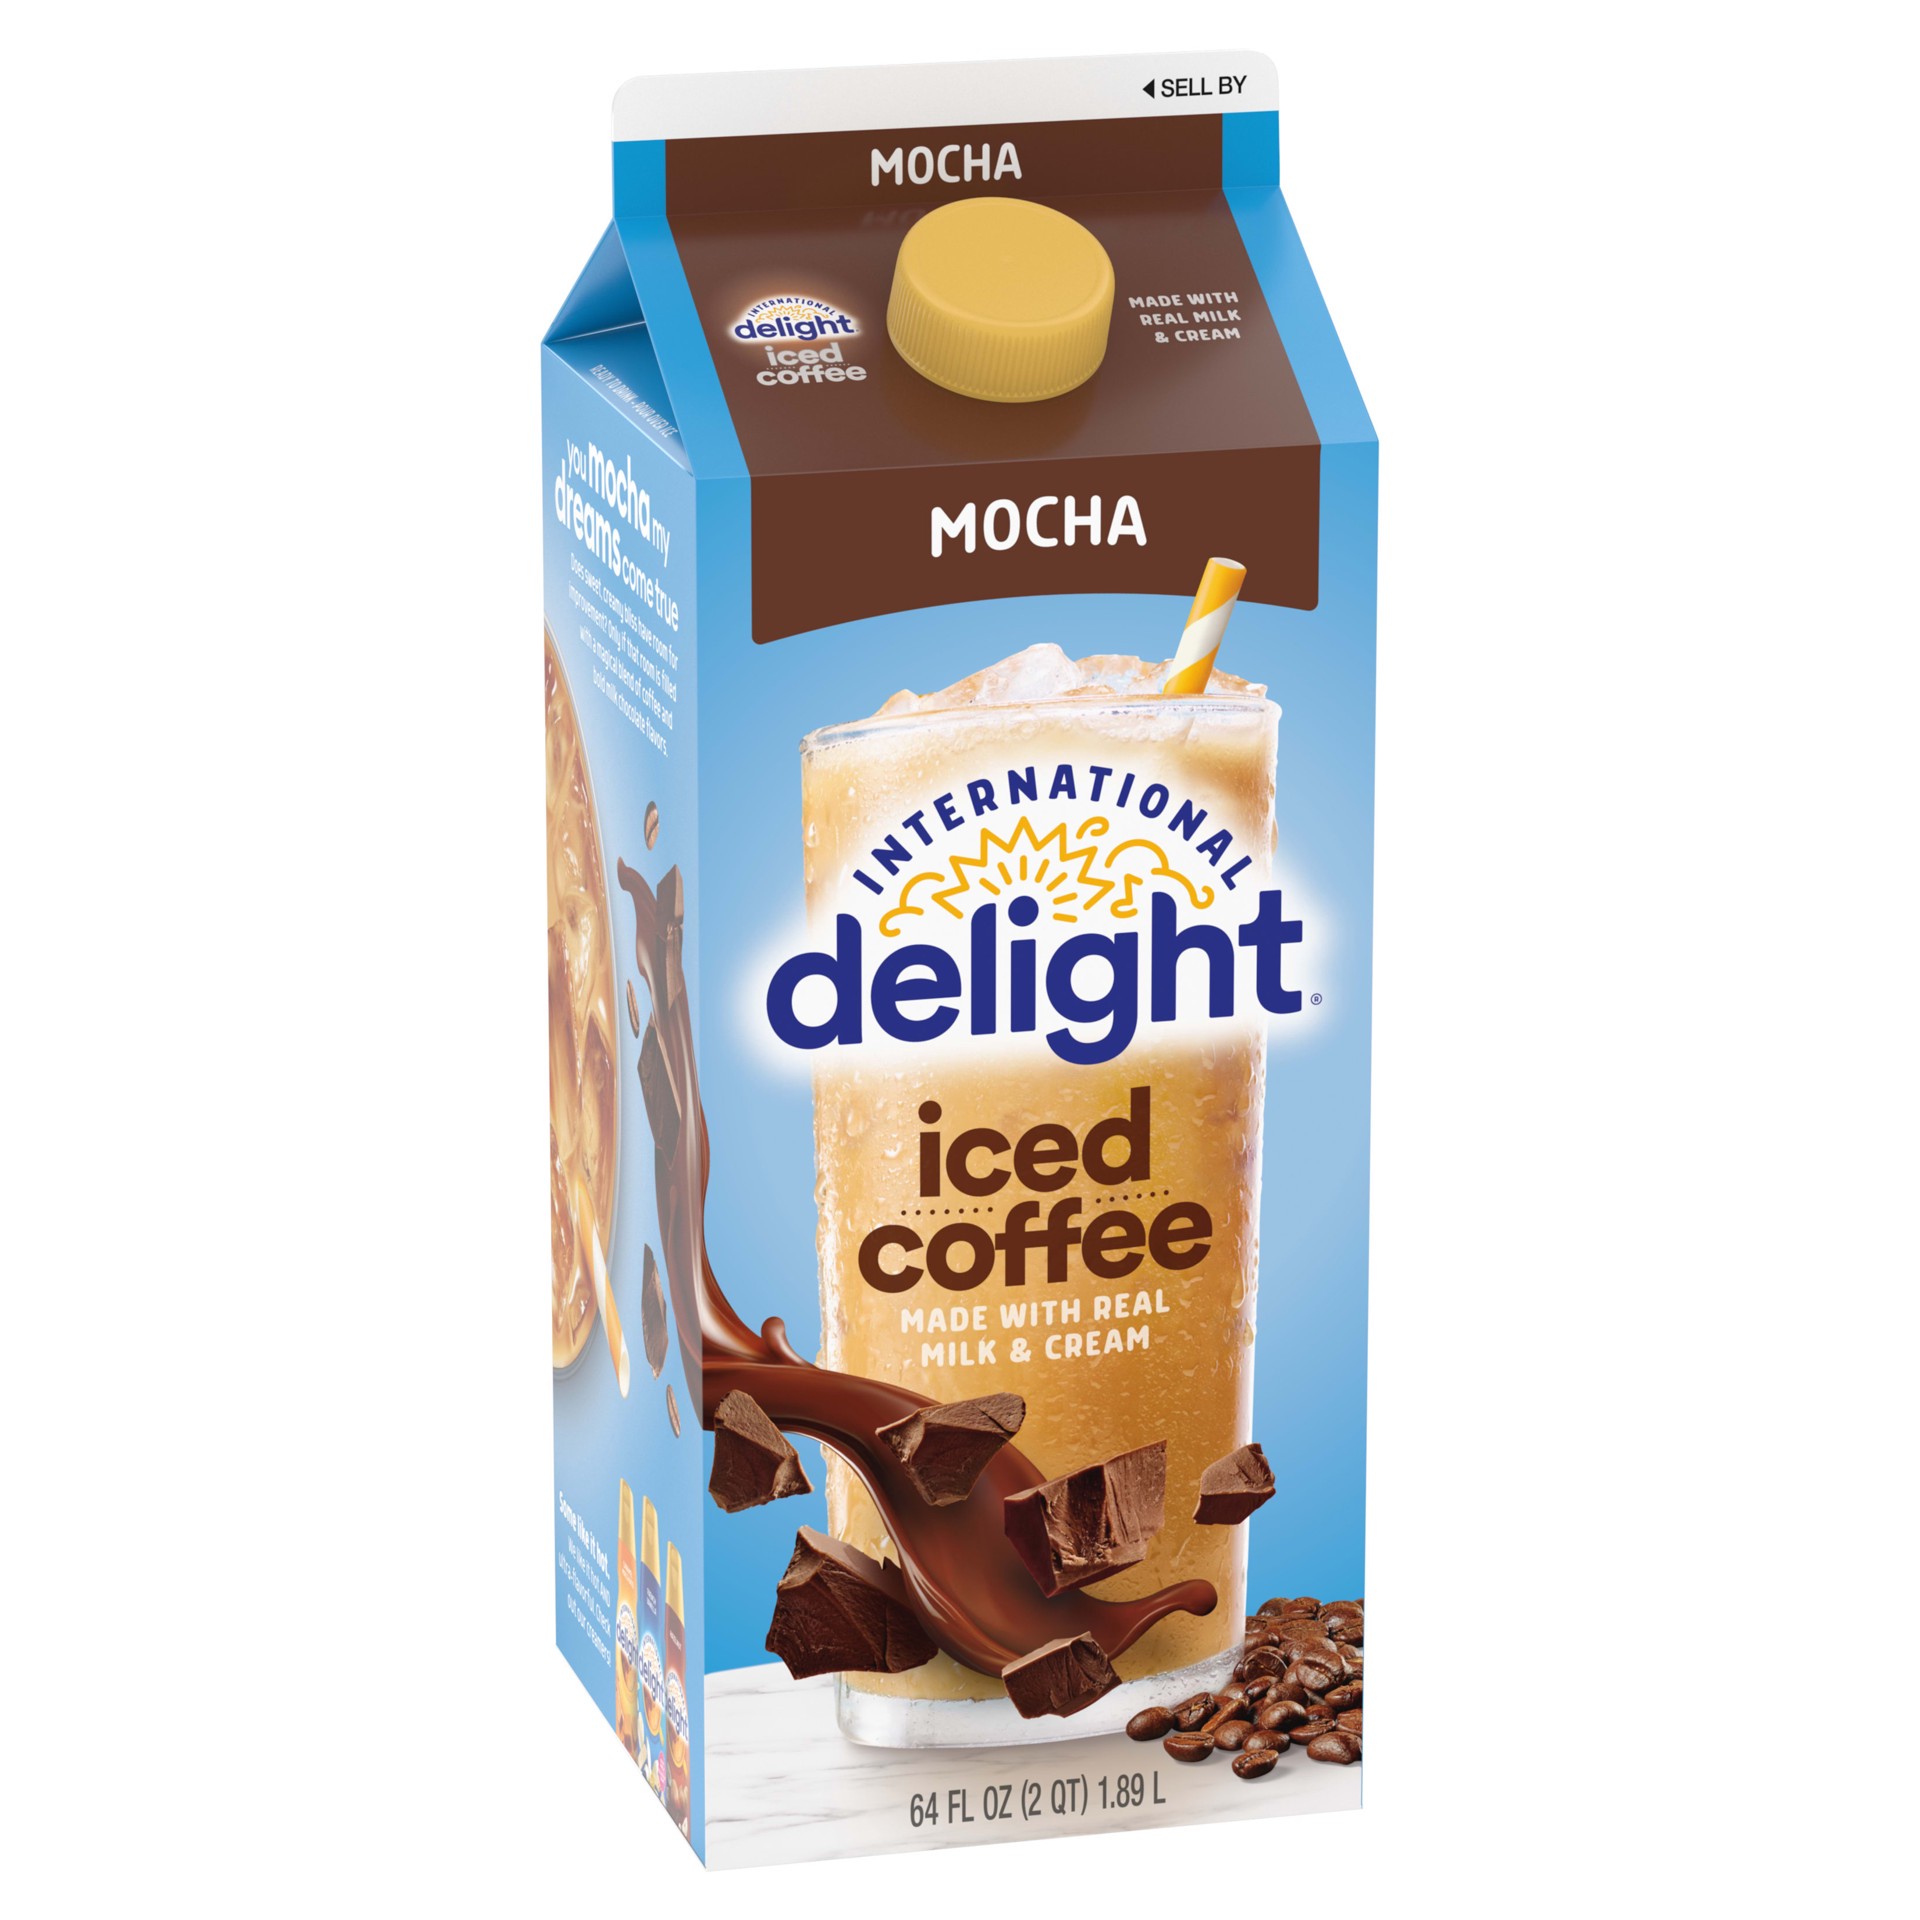 slide 5 of 5, International Delight Iced Coffee, Mocha, Ready to Pour Coffee Drinks Made with Real Milk and Cream, 64 FL OZ Carton, 64 fl oz